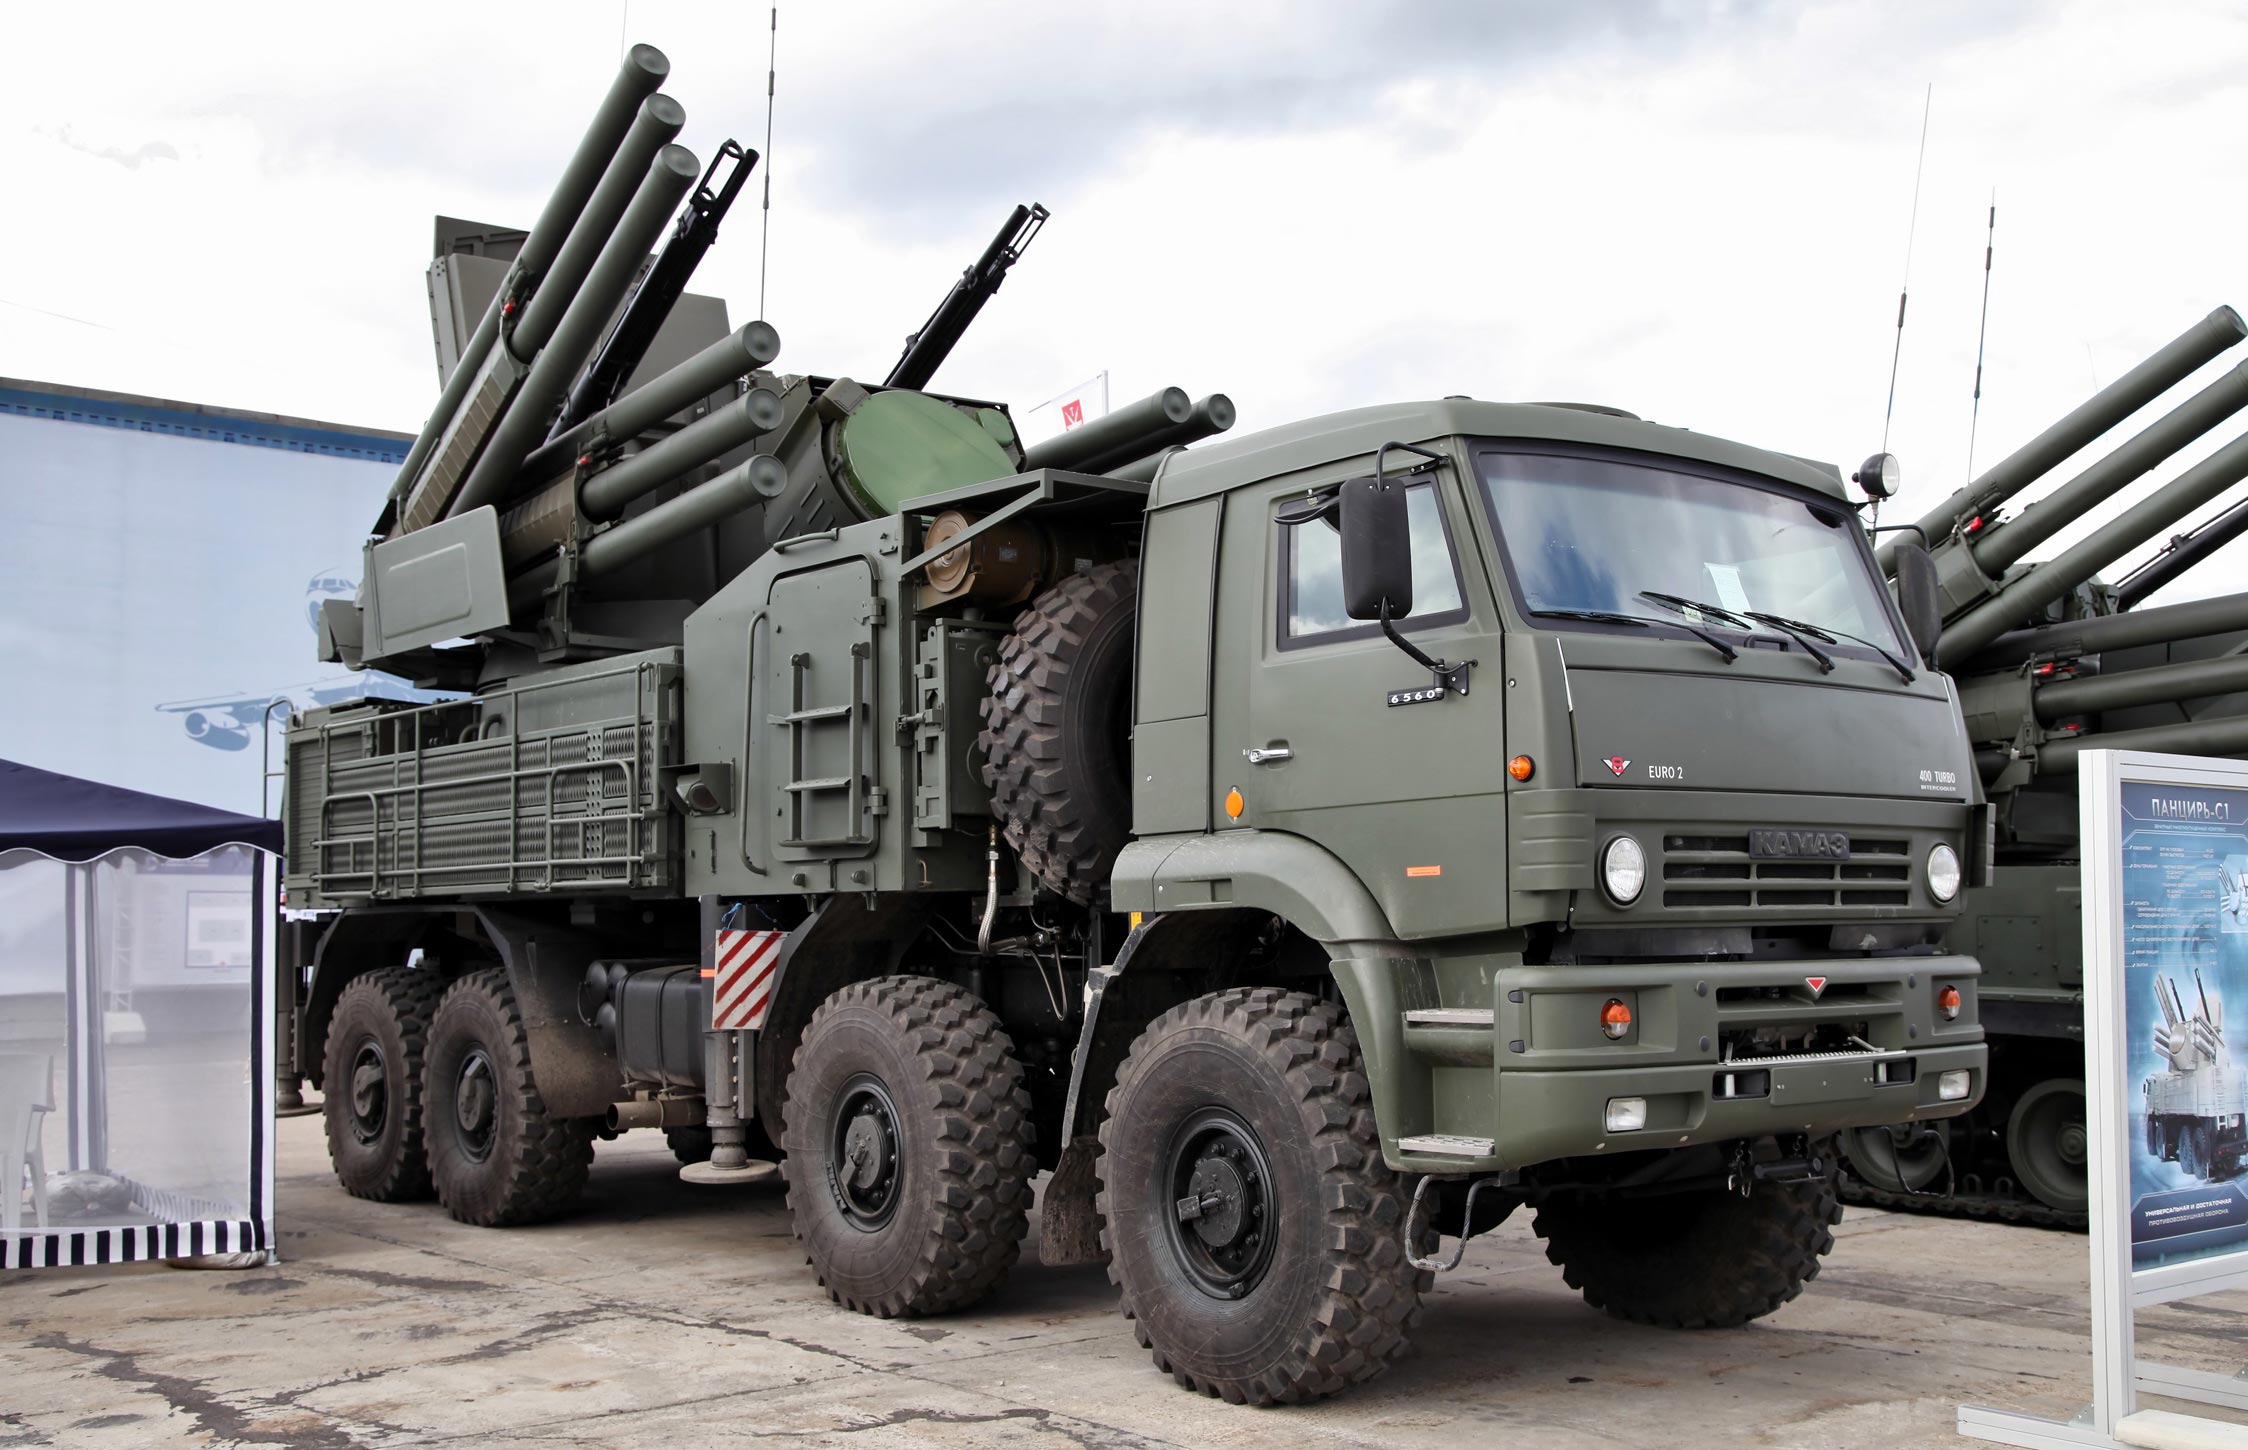 Image about Russian Pantsir Air Defense System- Sitting duck or Top Dog?